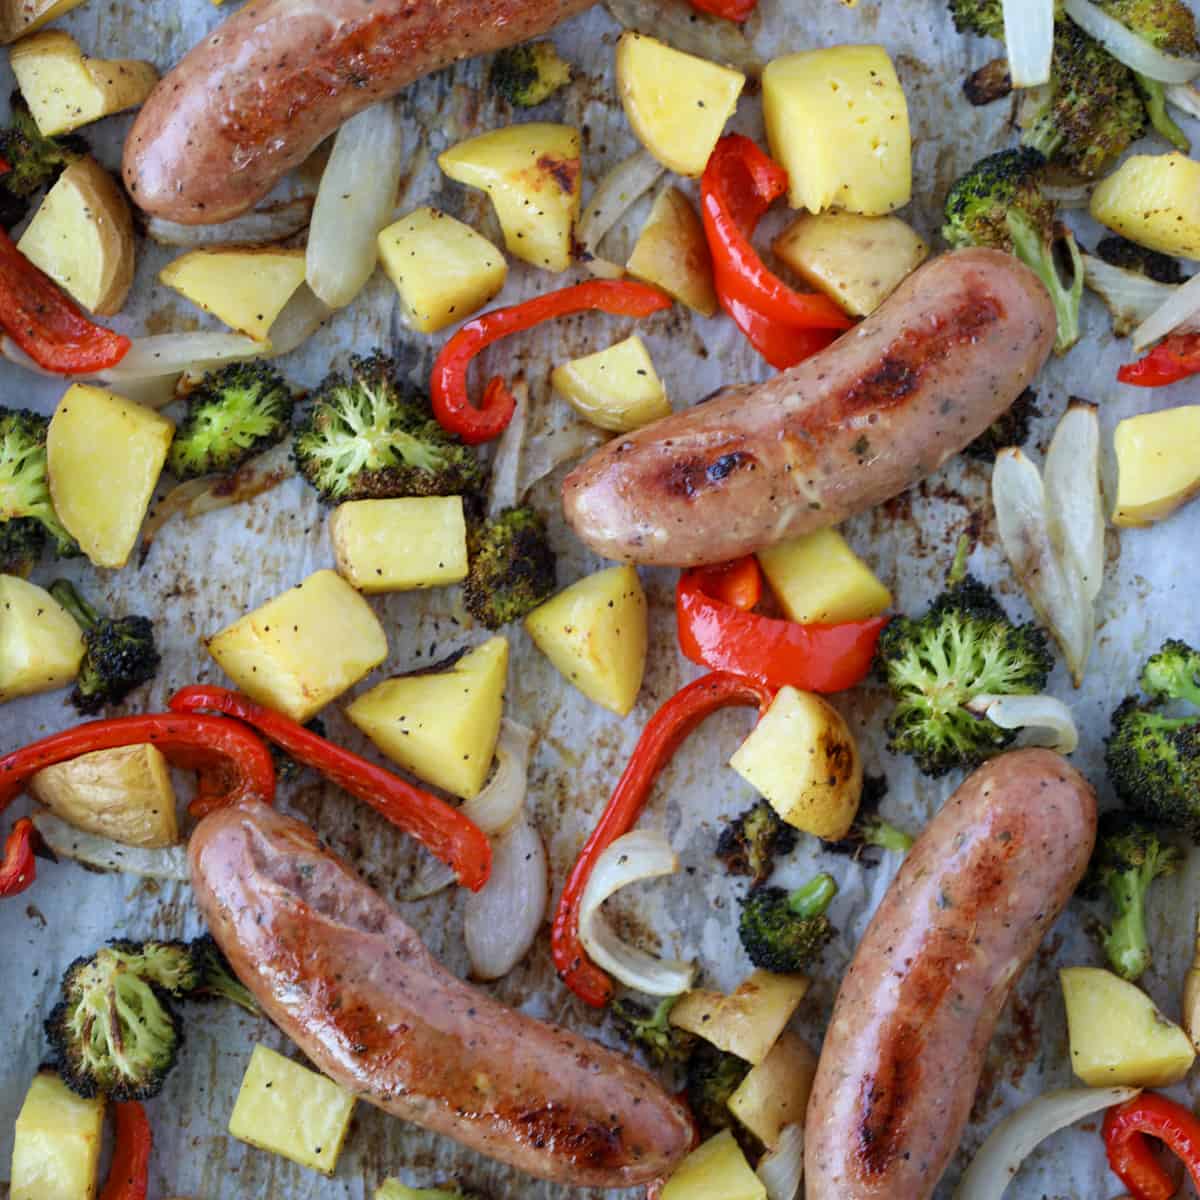 Sausages cooked in the oven with the veggies